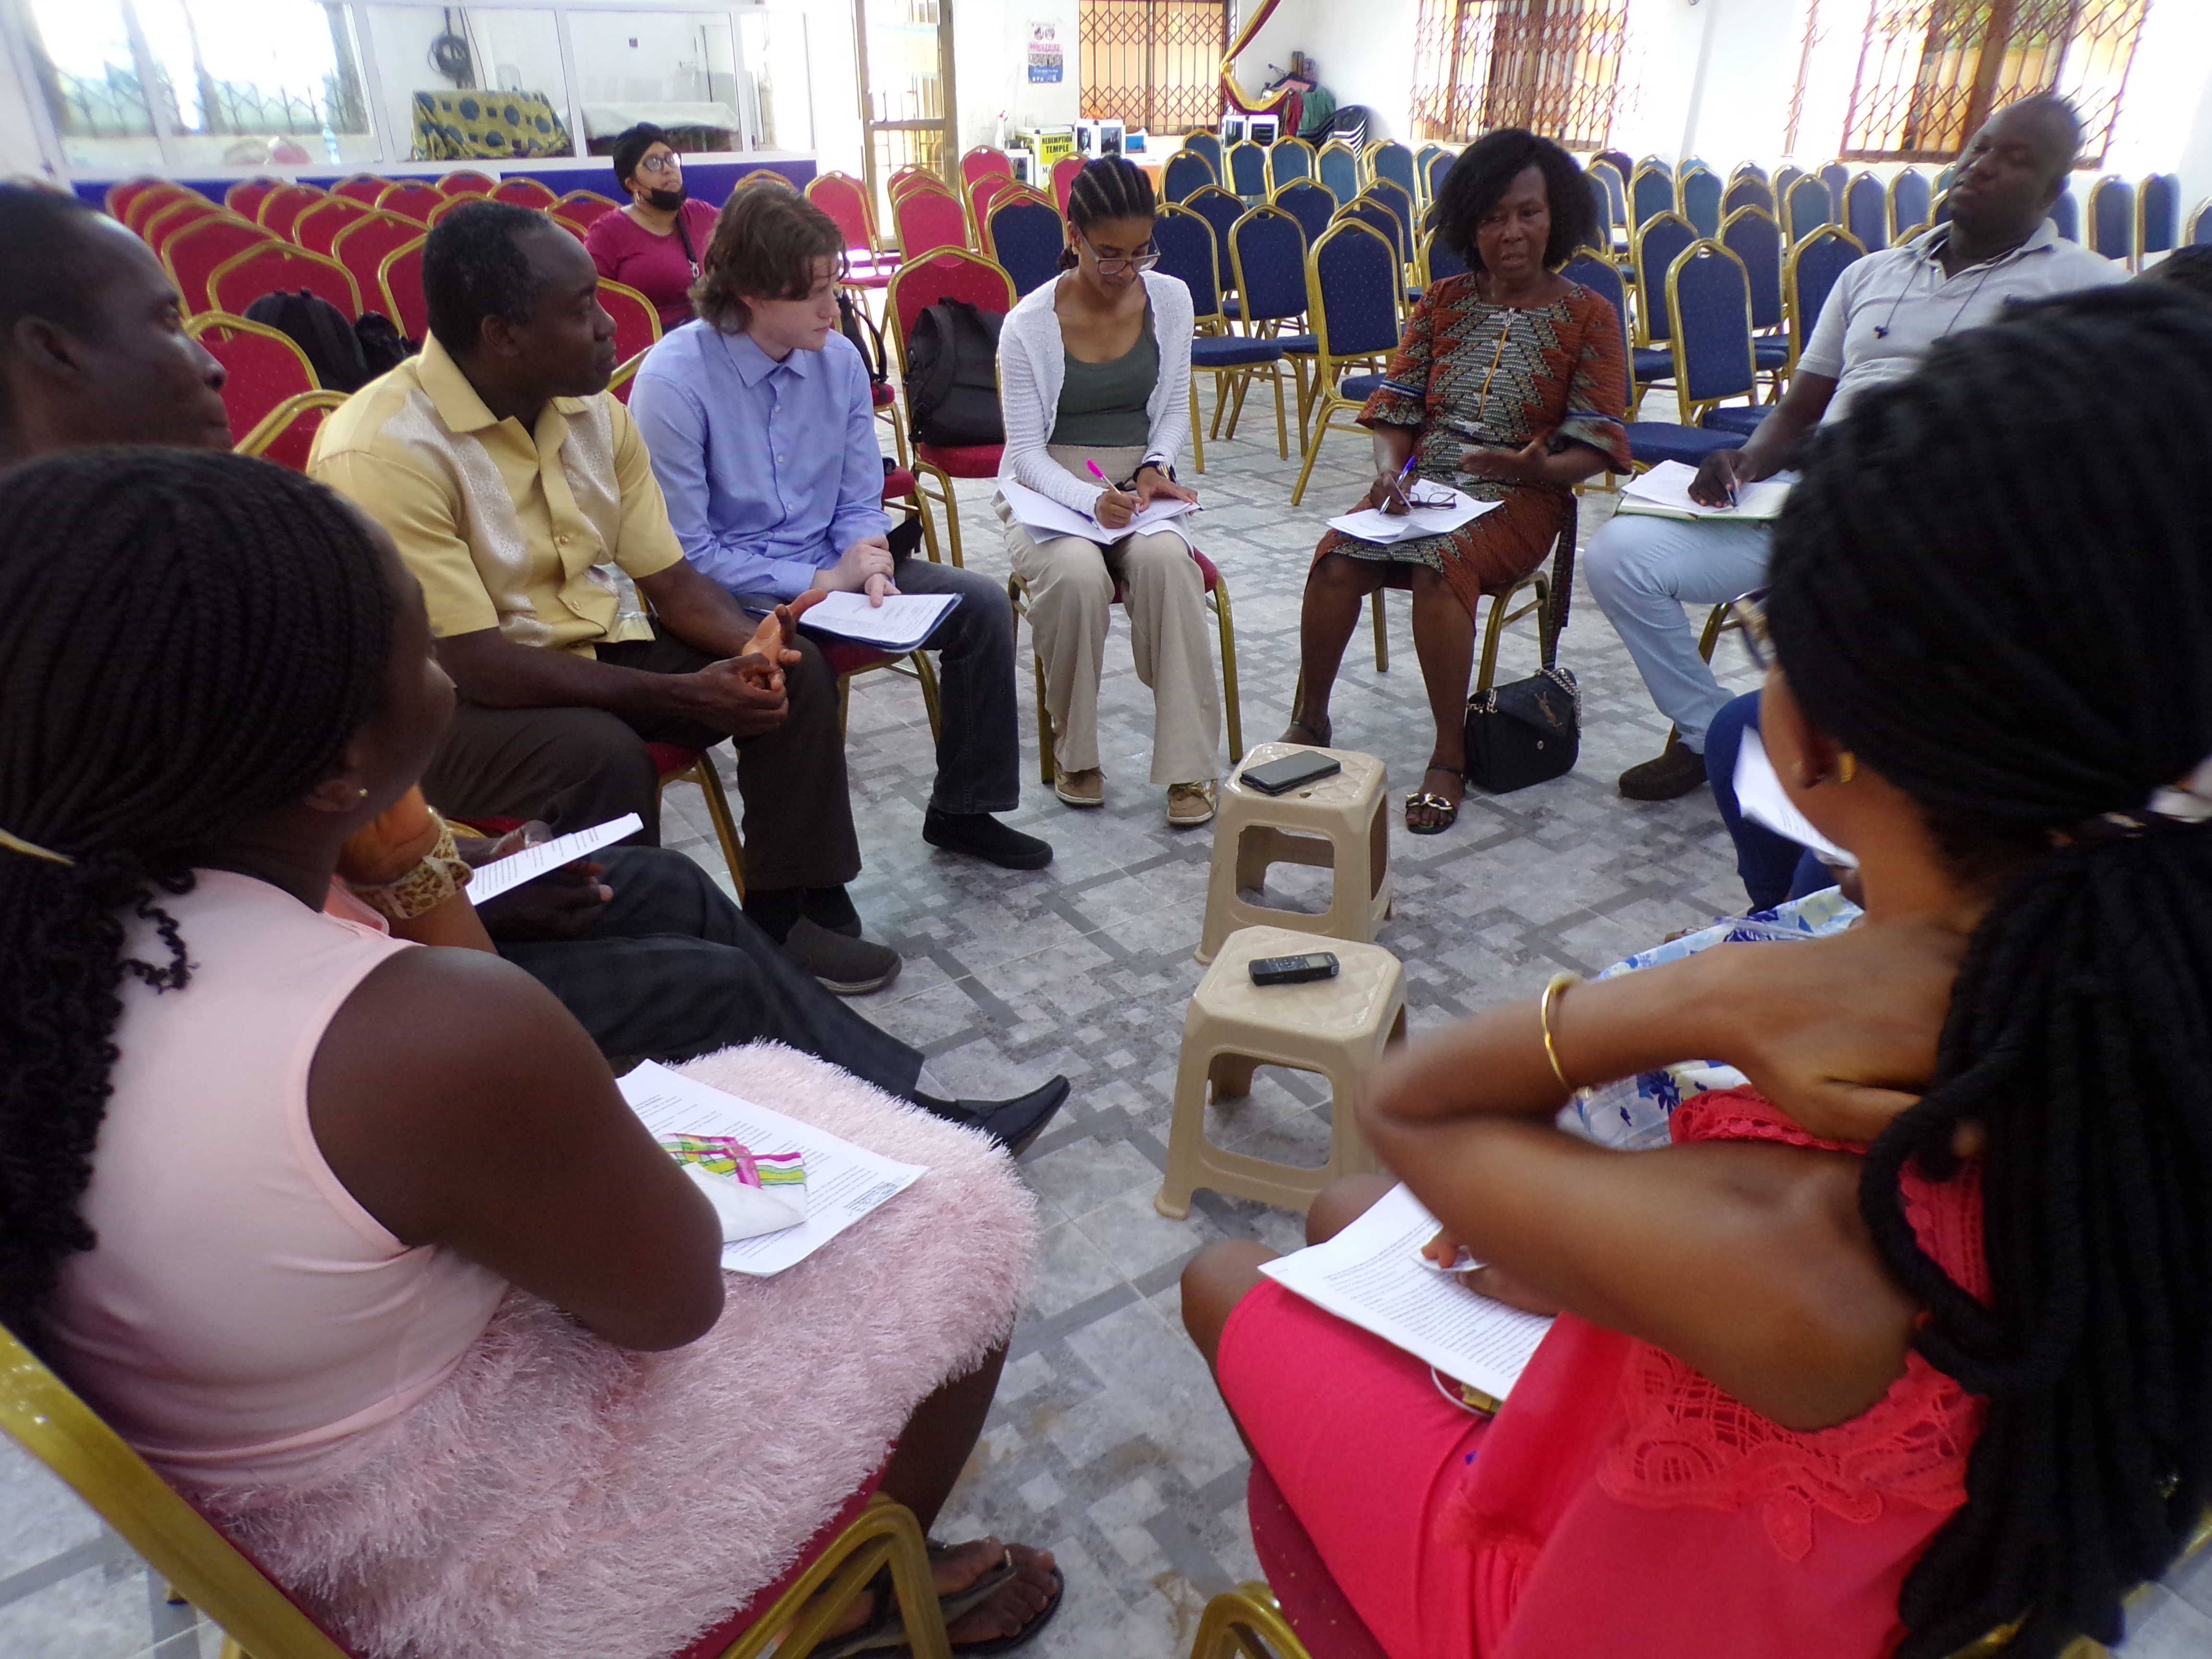 The University research group holds a focus group as part of its research in Ghana.